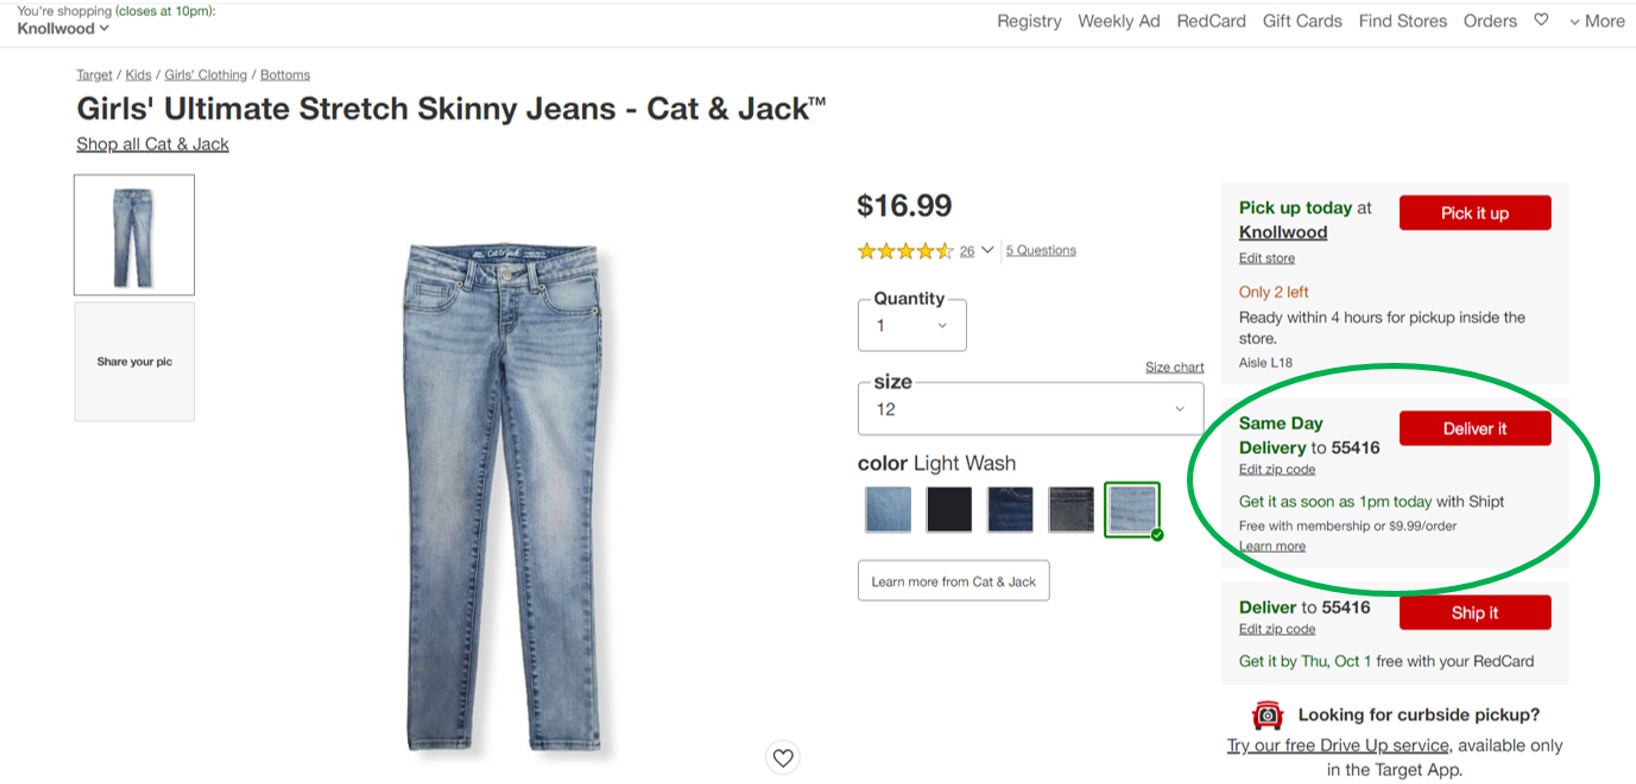 A screen shot of a Target.com product page showing girls' denim jeans, with the Deliver It button on the right